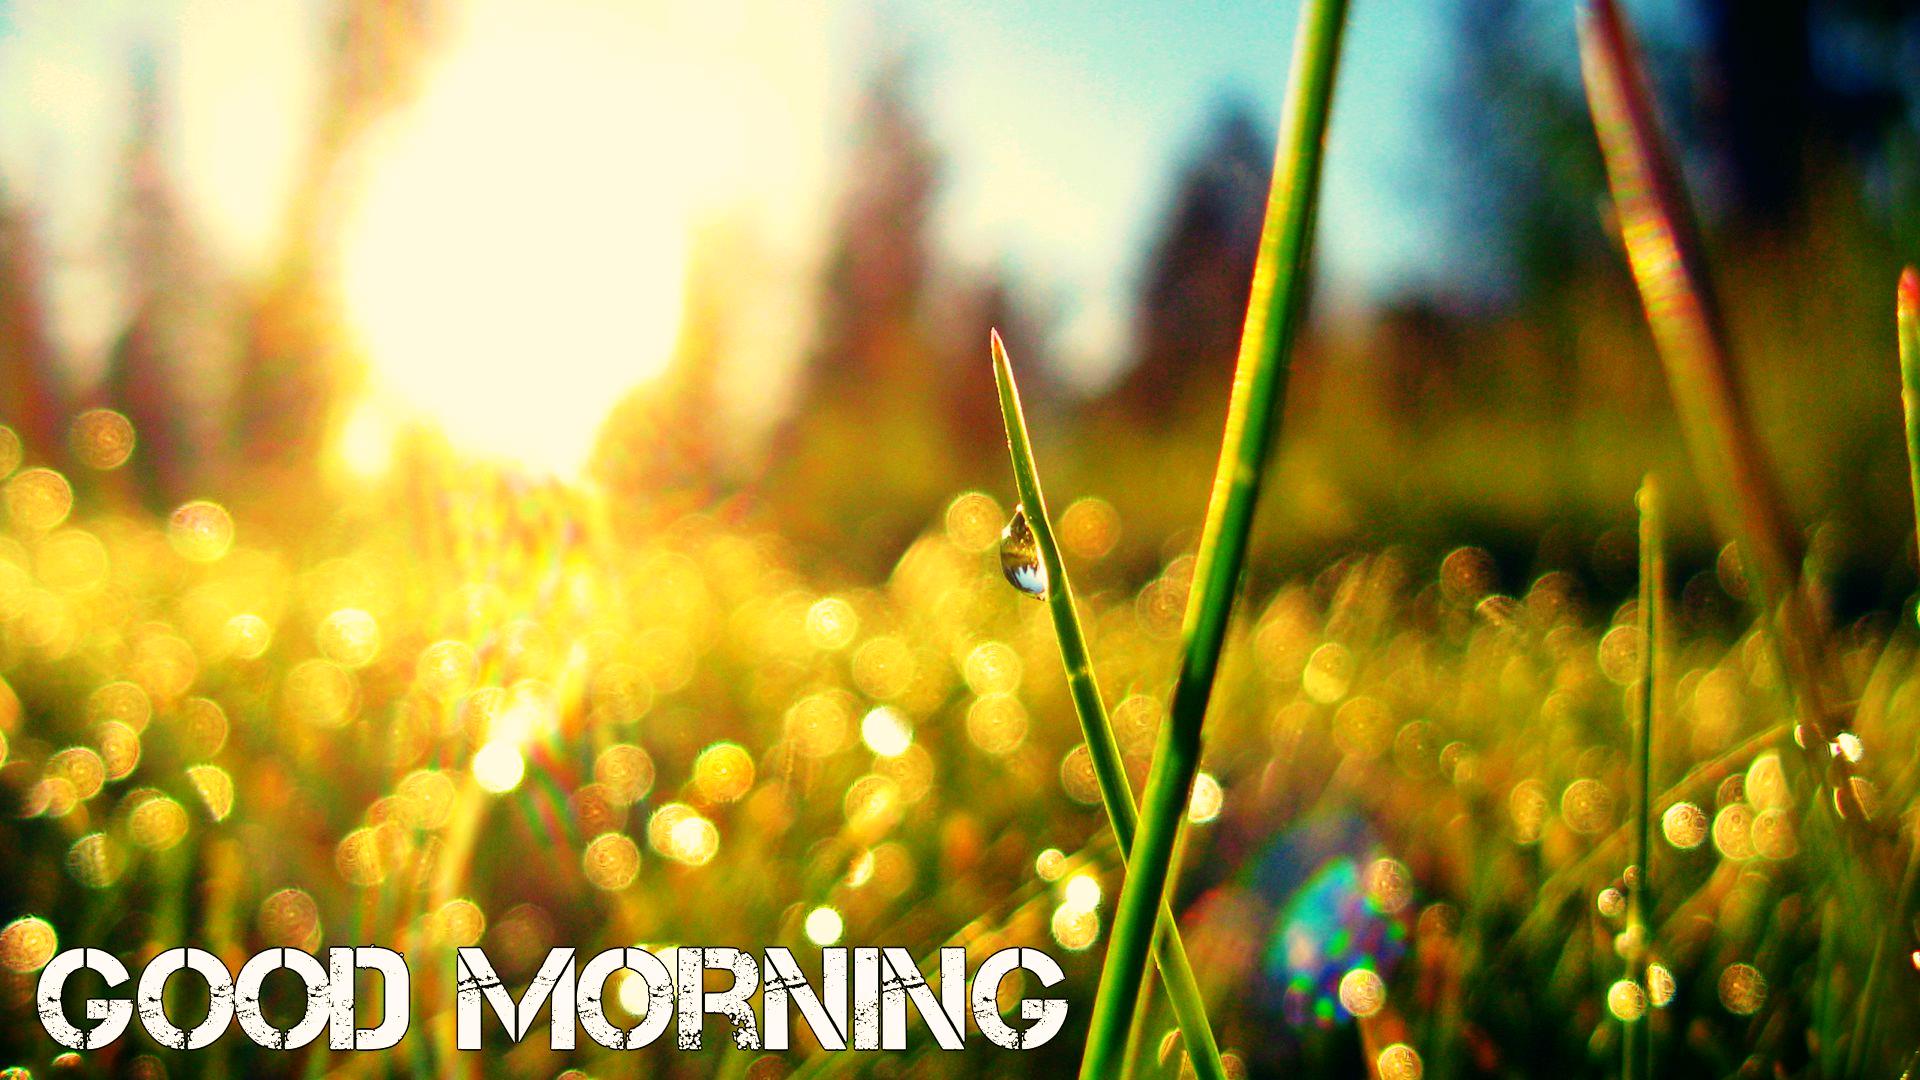 good morning wallpaper download,people in nature,nature,grass,green,light